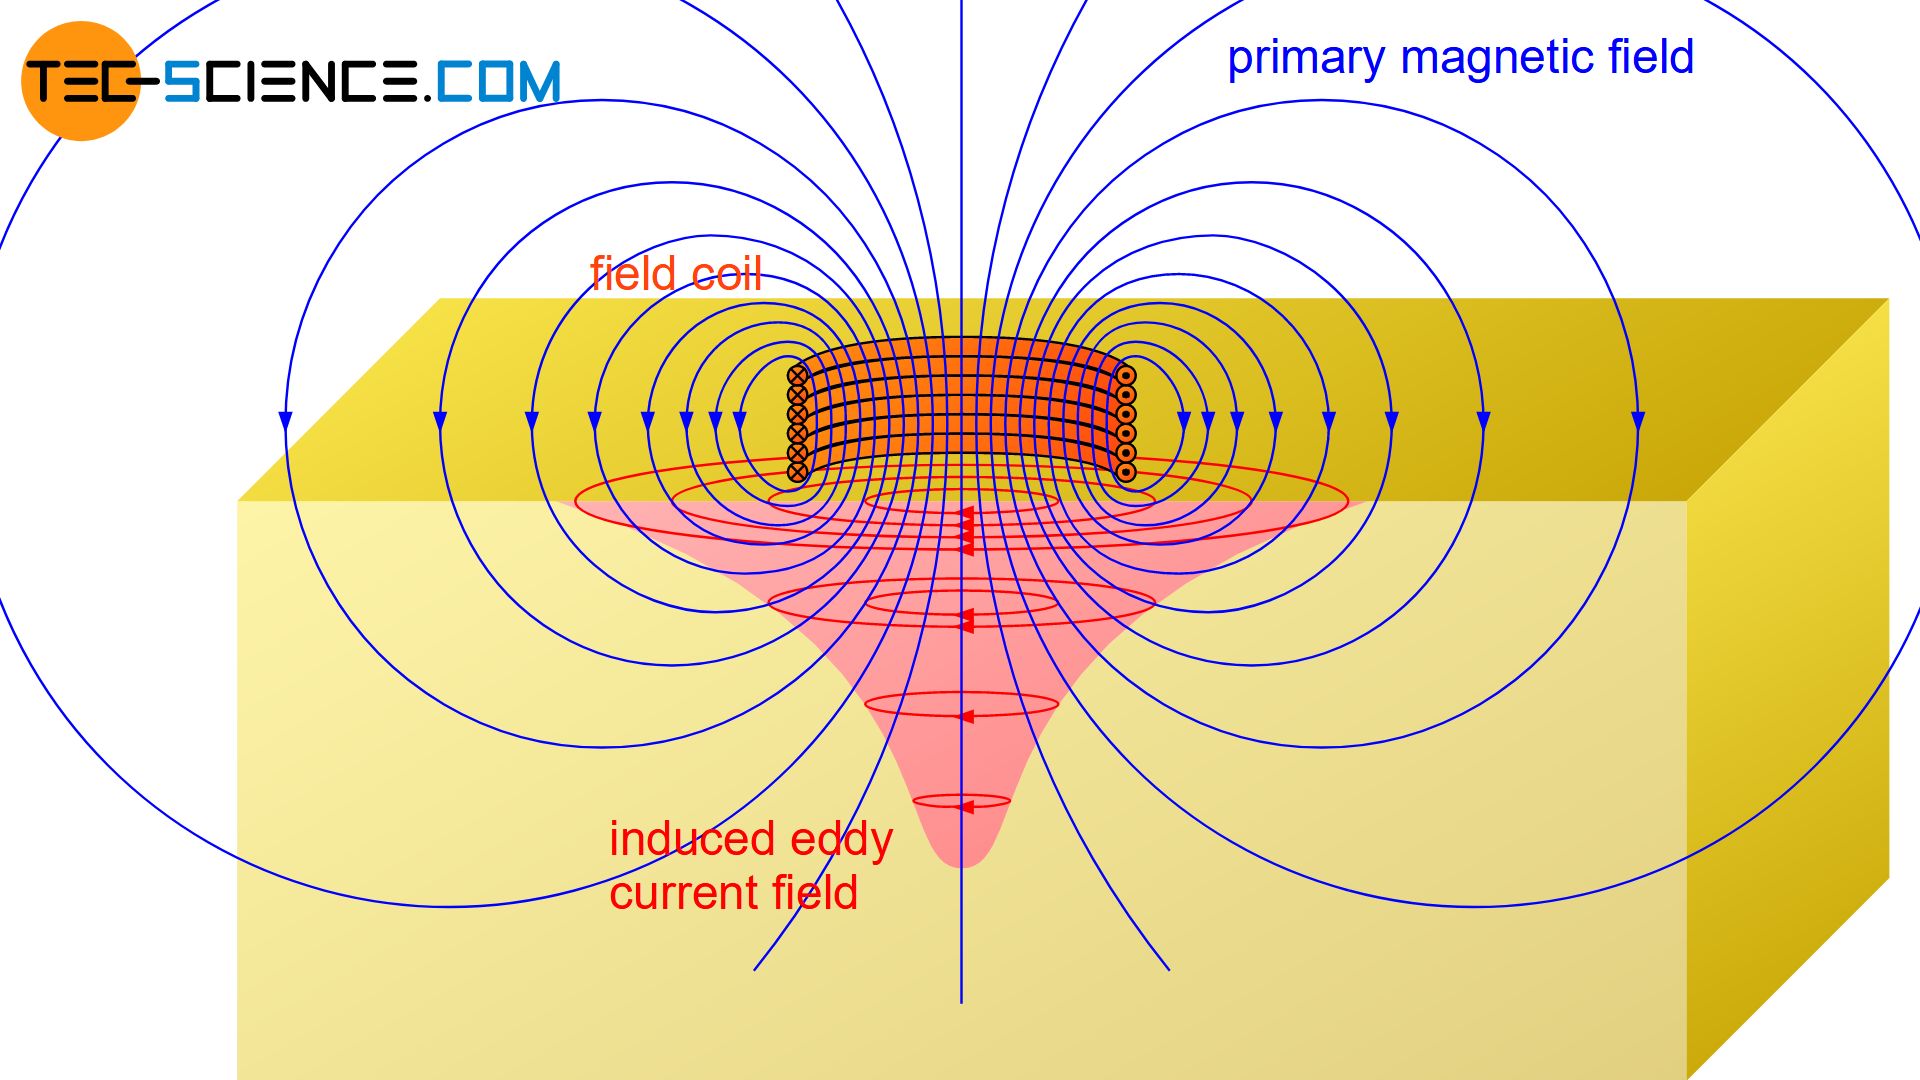 Induction of eddy currents by primary magnetic field